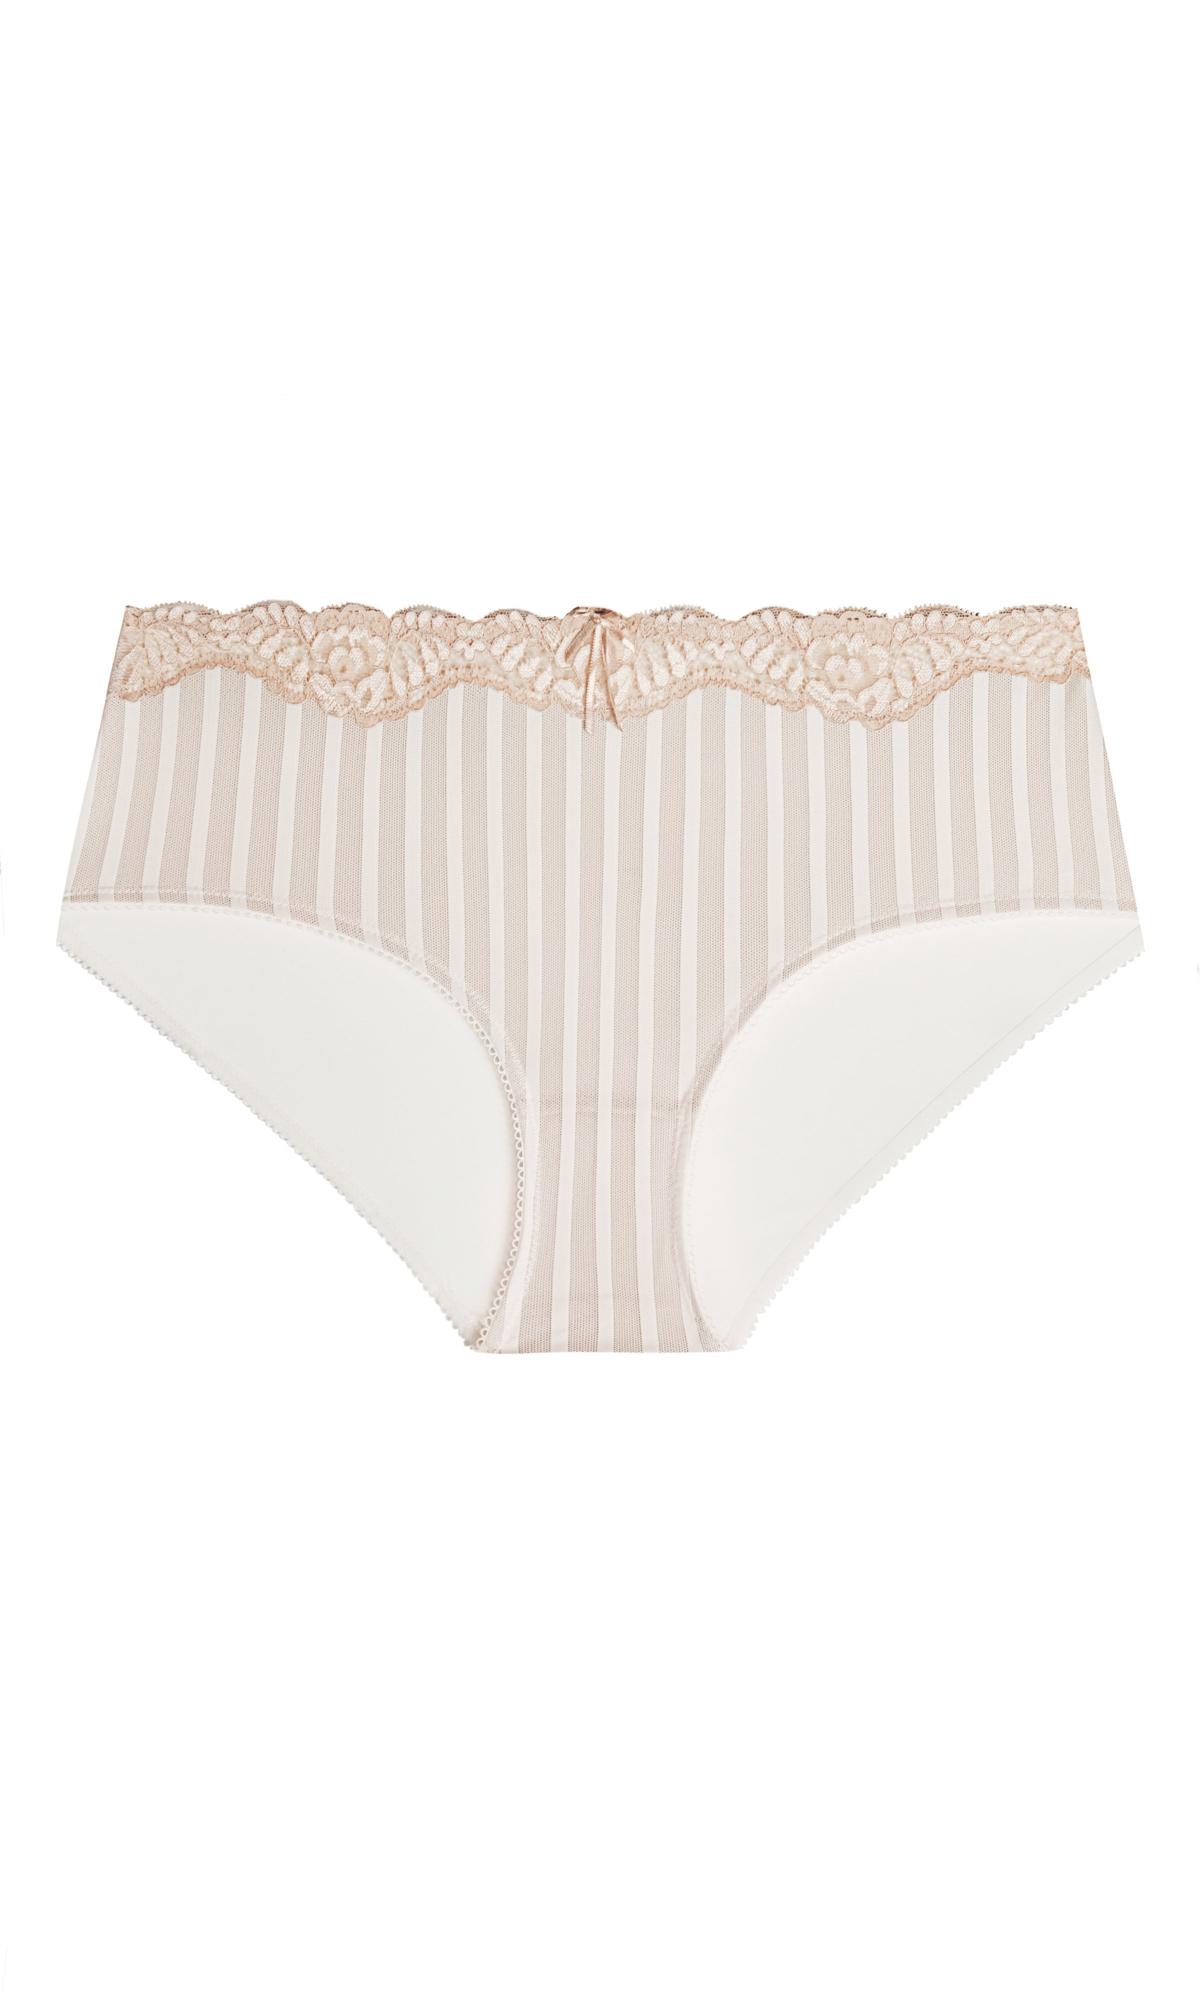 Evans Ivory White Stripe Lace Trim Knickers 3